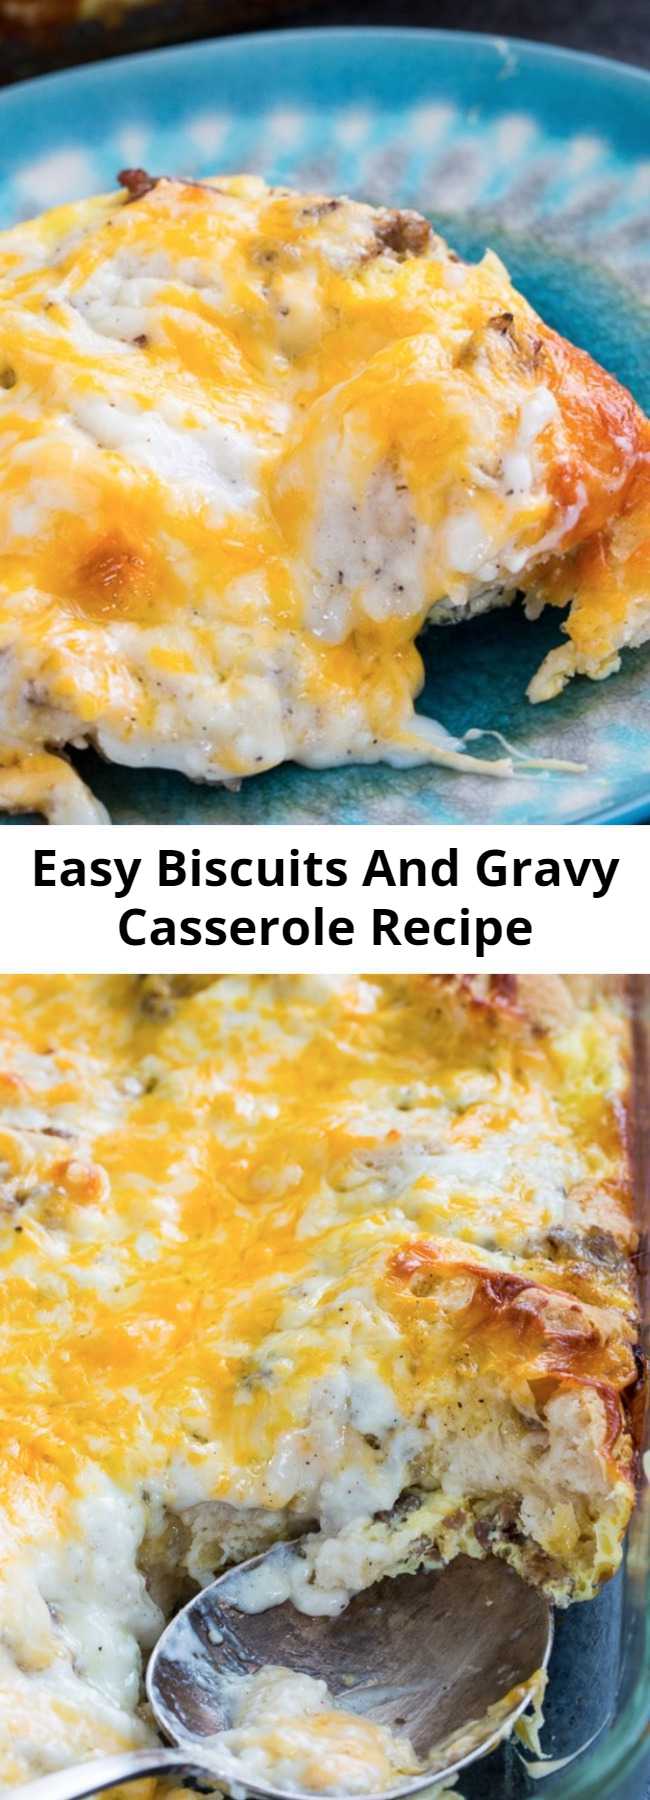 Easy Biscuits And Gravy Casserole Recipe - Biscuits and Gravy Casserole has all the flavor of the southern classic-Biscuits and Sausage Gravy, in casserole form and it couldn't be easier to make.